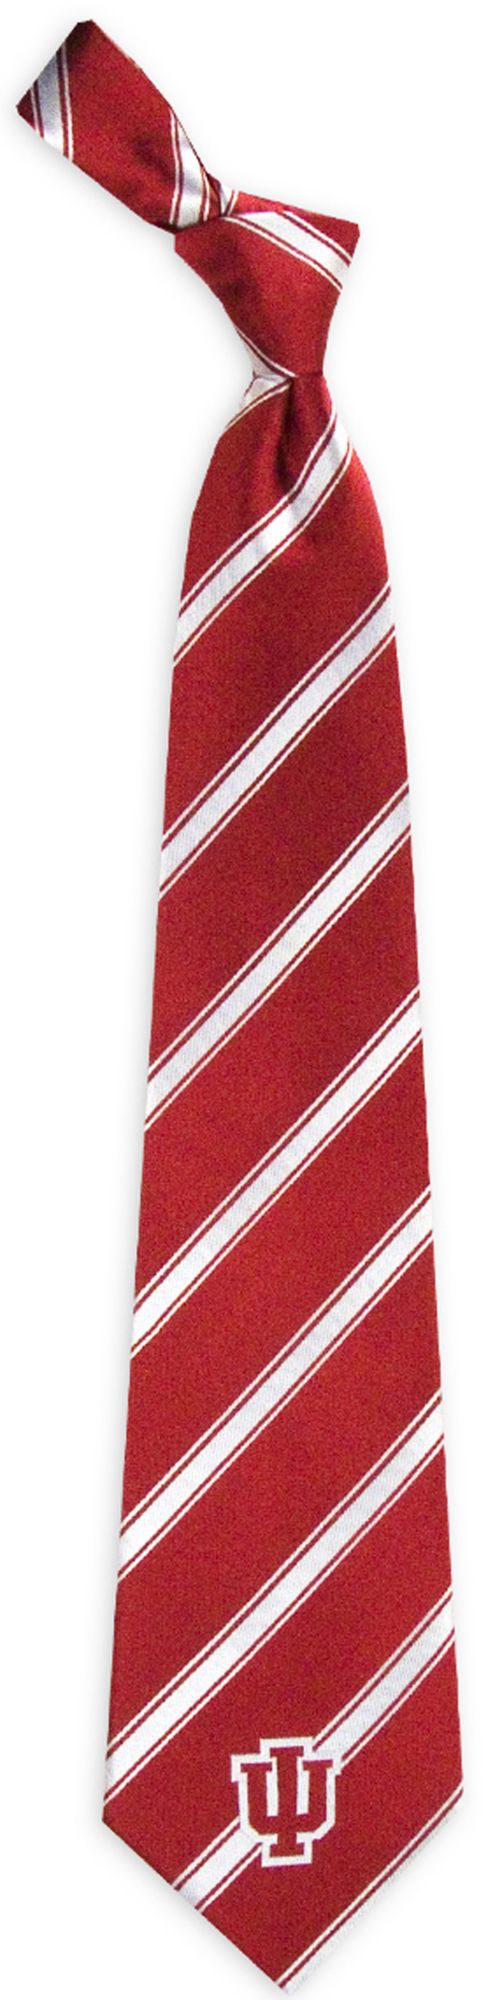 Eagles Wings Indiana Hoosiers Woven Poly 1 Necktie